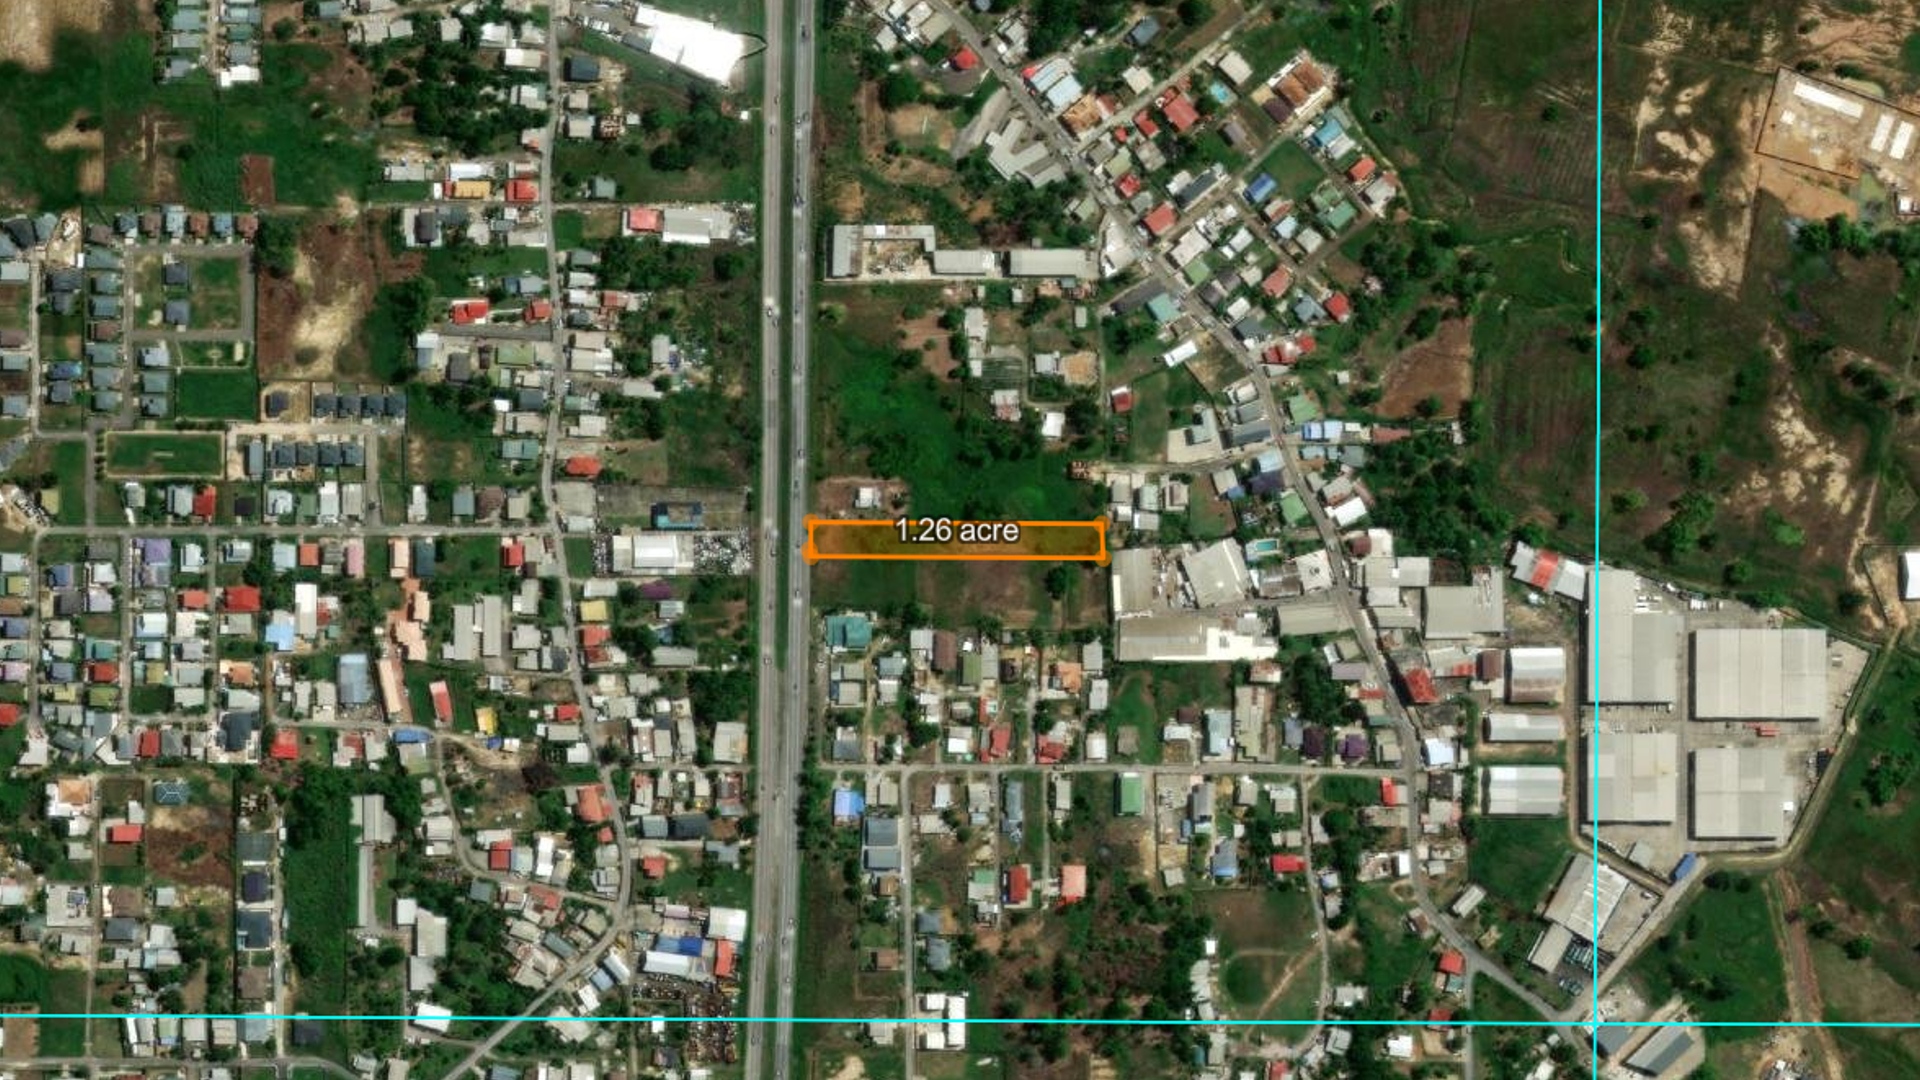 1.25-acre commercial development site in Freeport. High-traffic location on Solomon Hochoy Highway. Call Cen-Trin Real Estate to learn more.